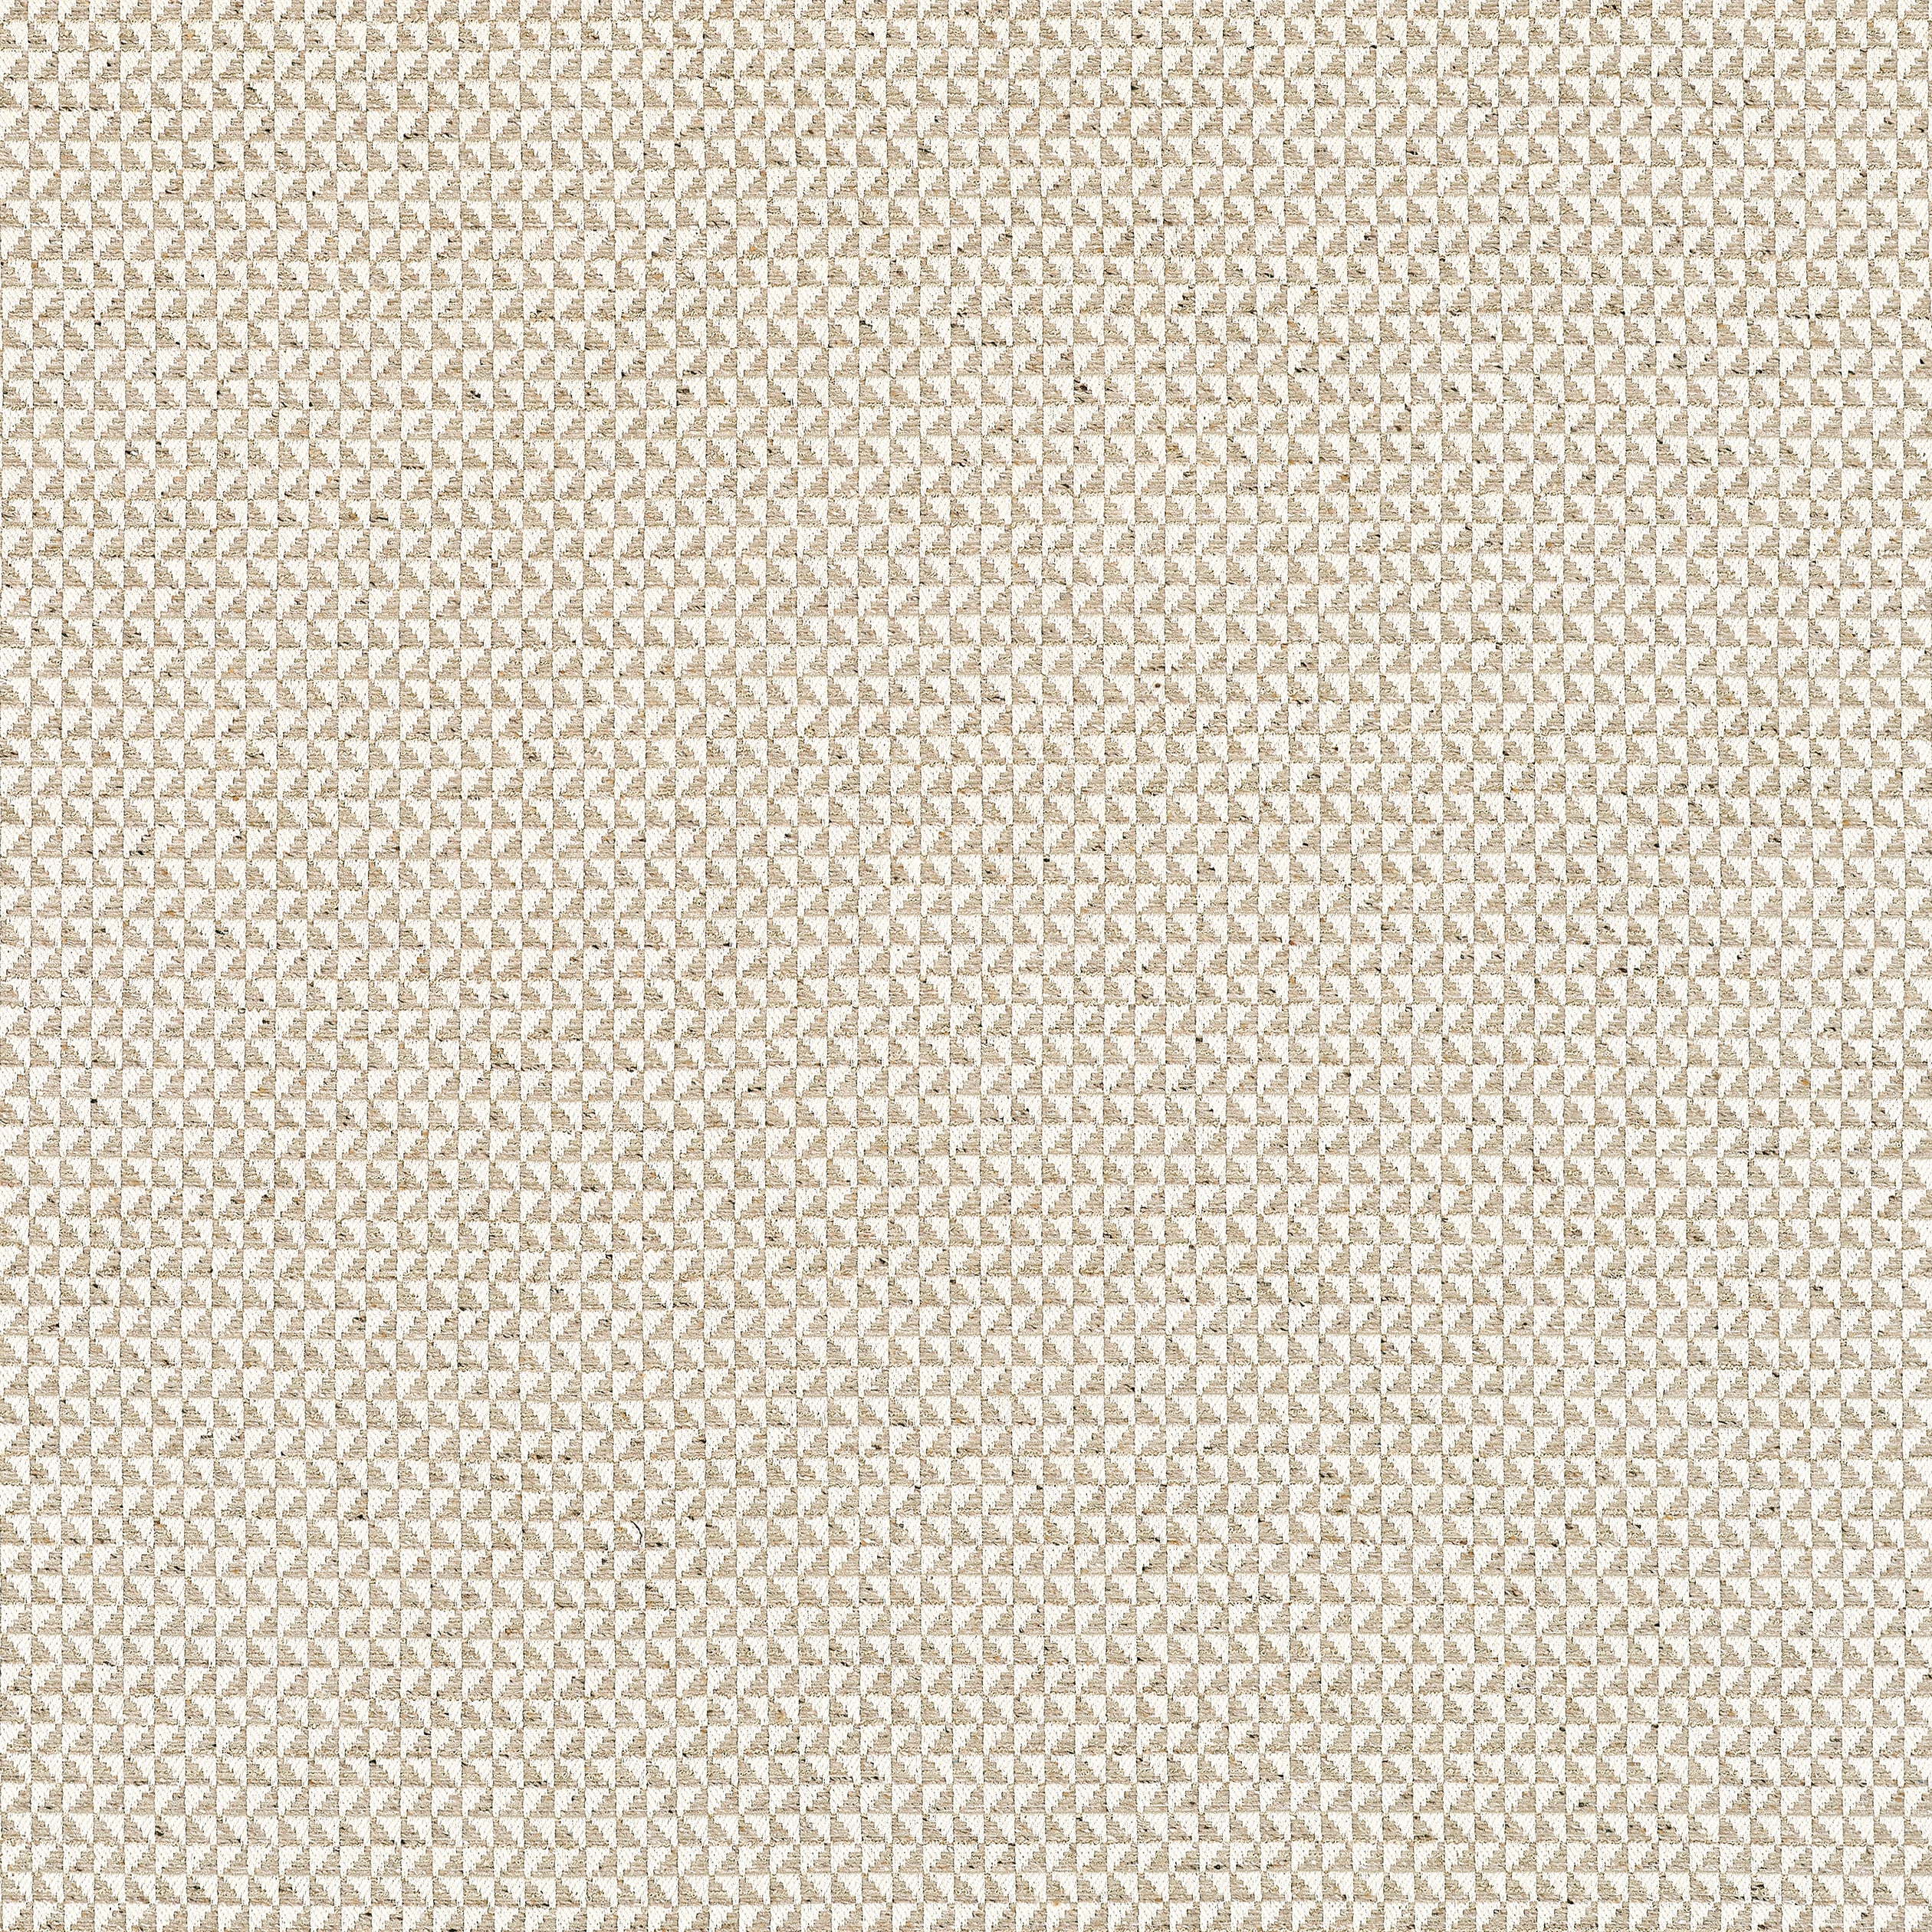 Pollux fabric in flax color - pattern number W81912 - by Thibaut in the Companions collection